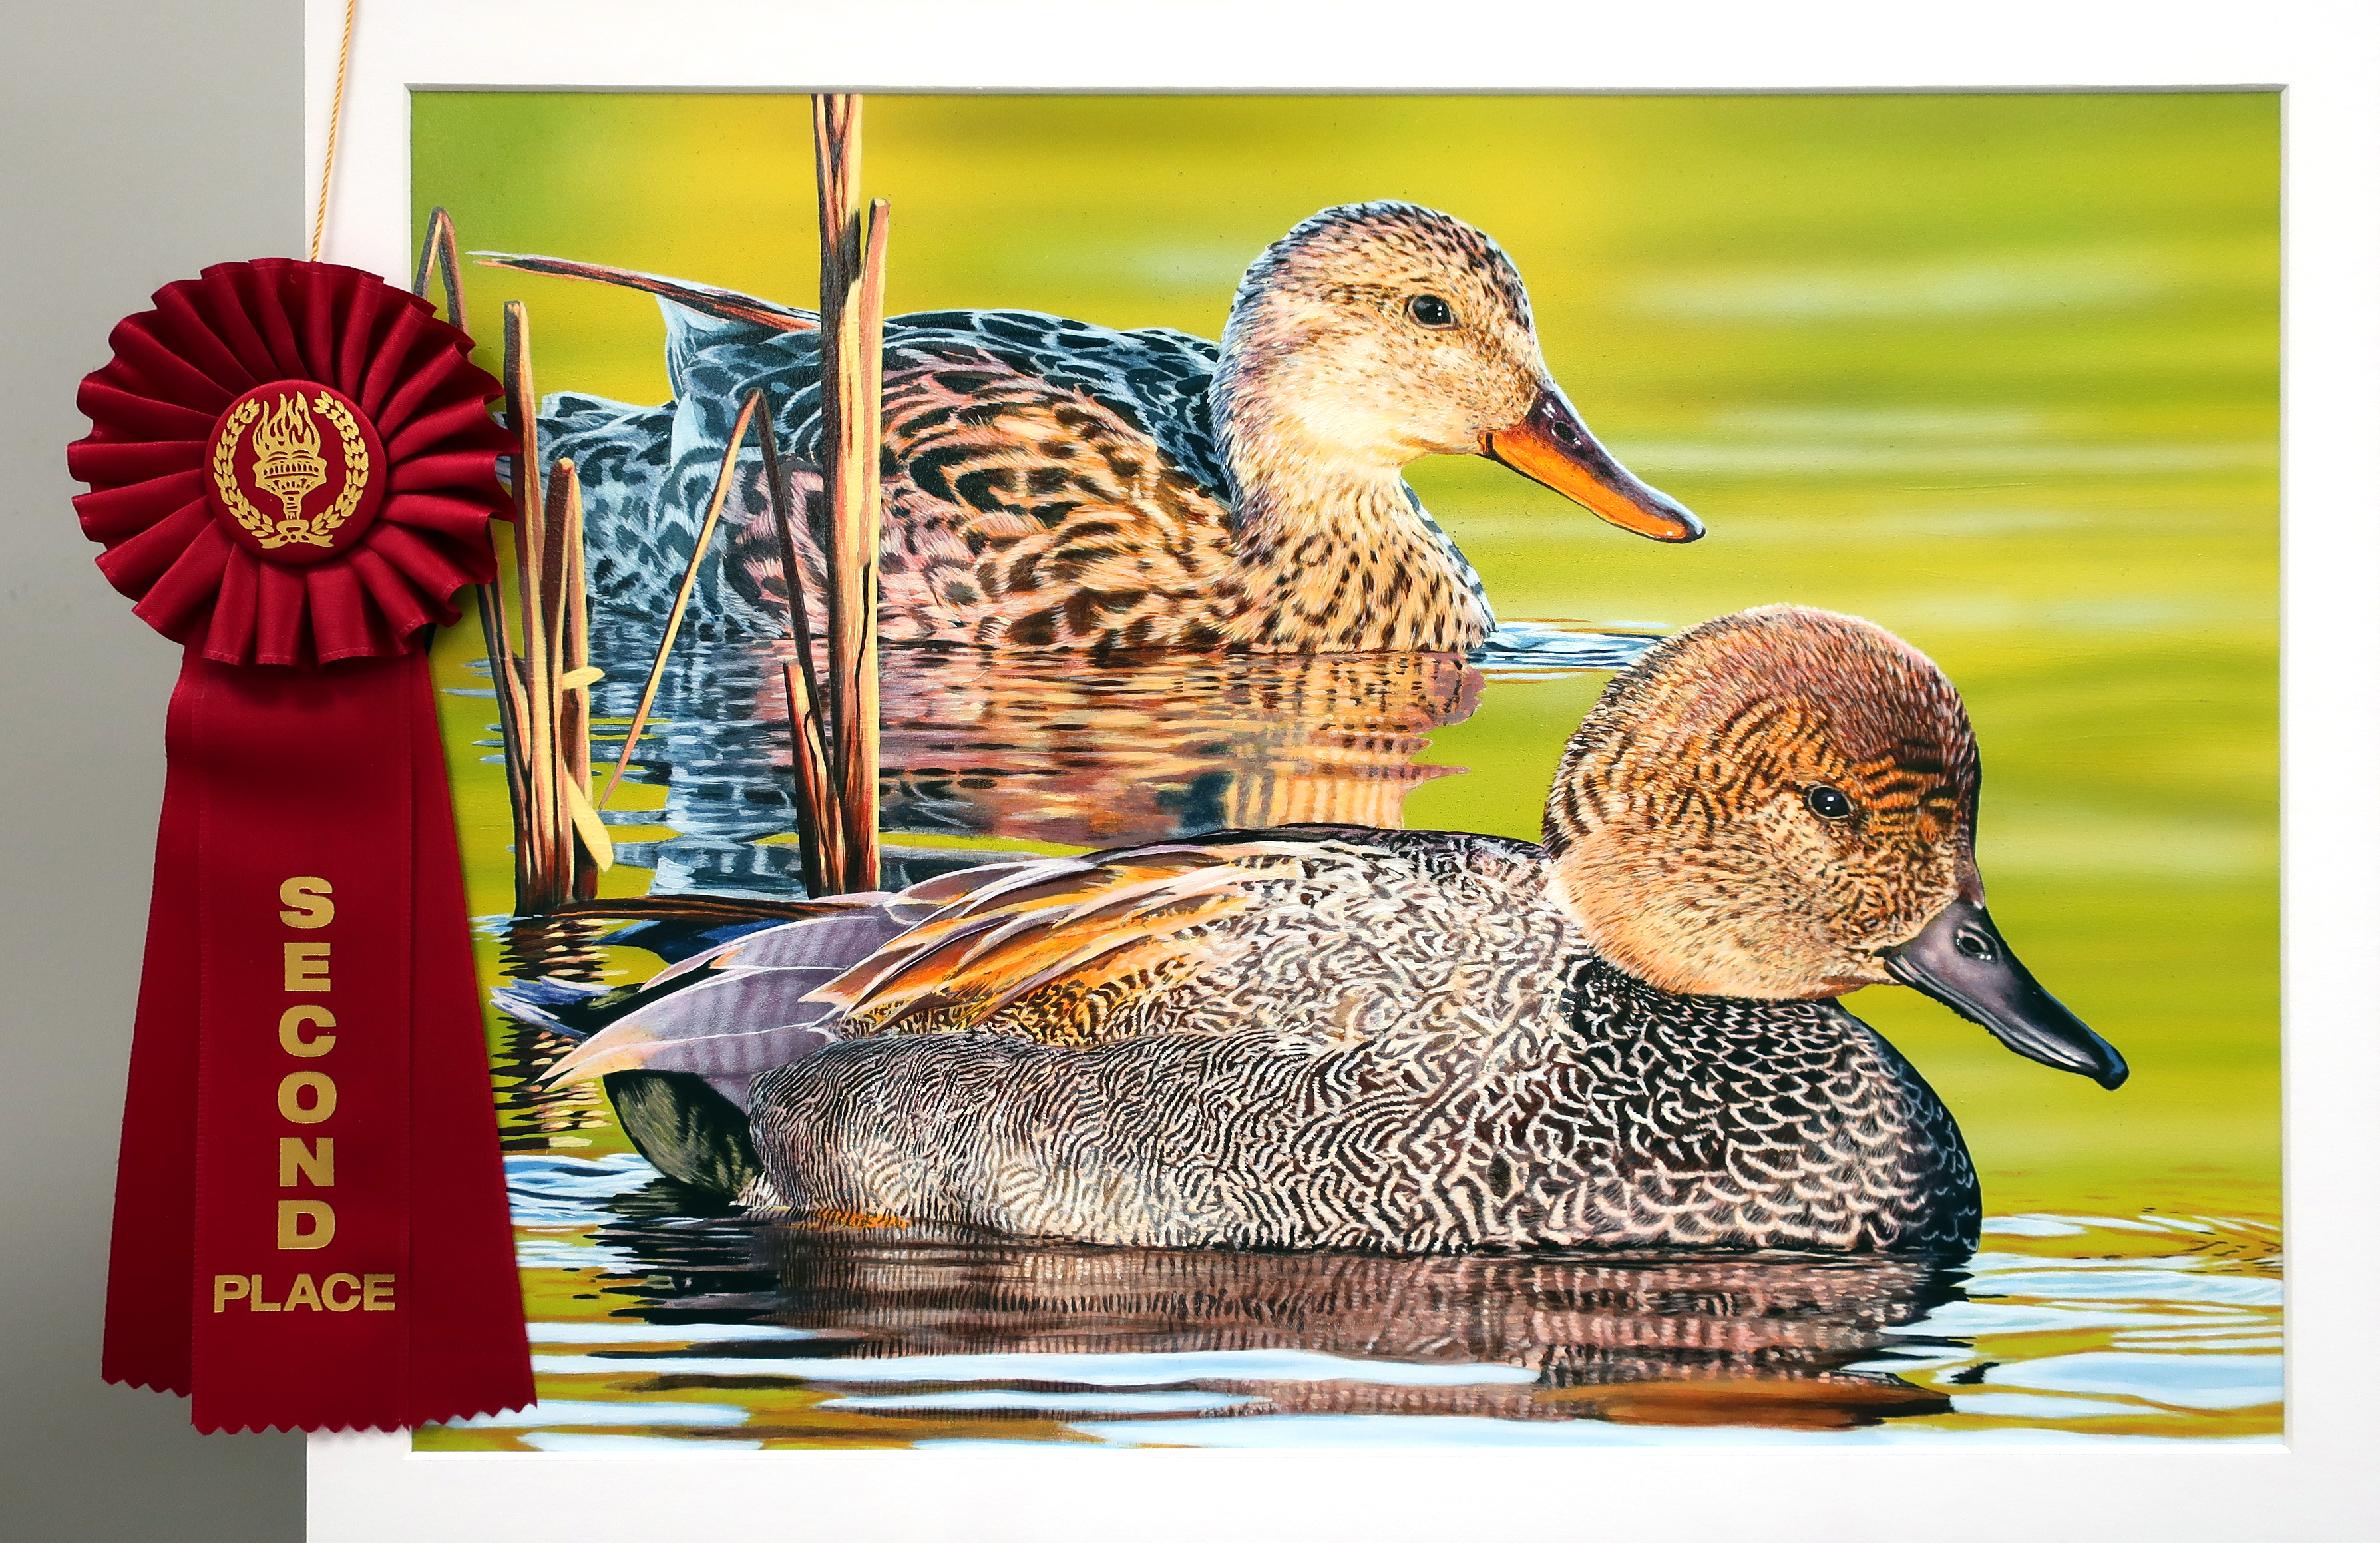 2nd place duck stamp of two gadwalls in water